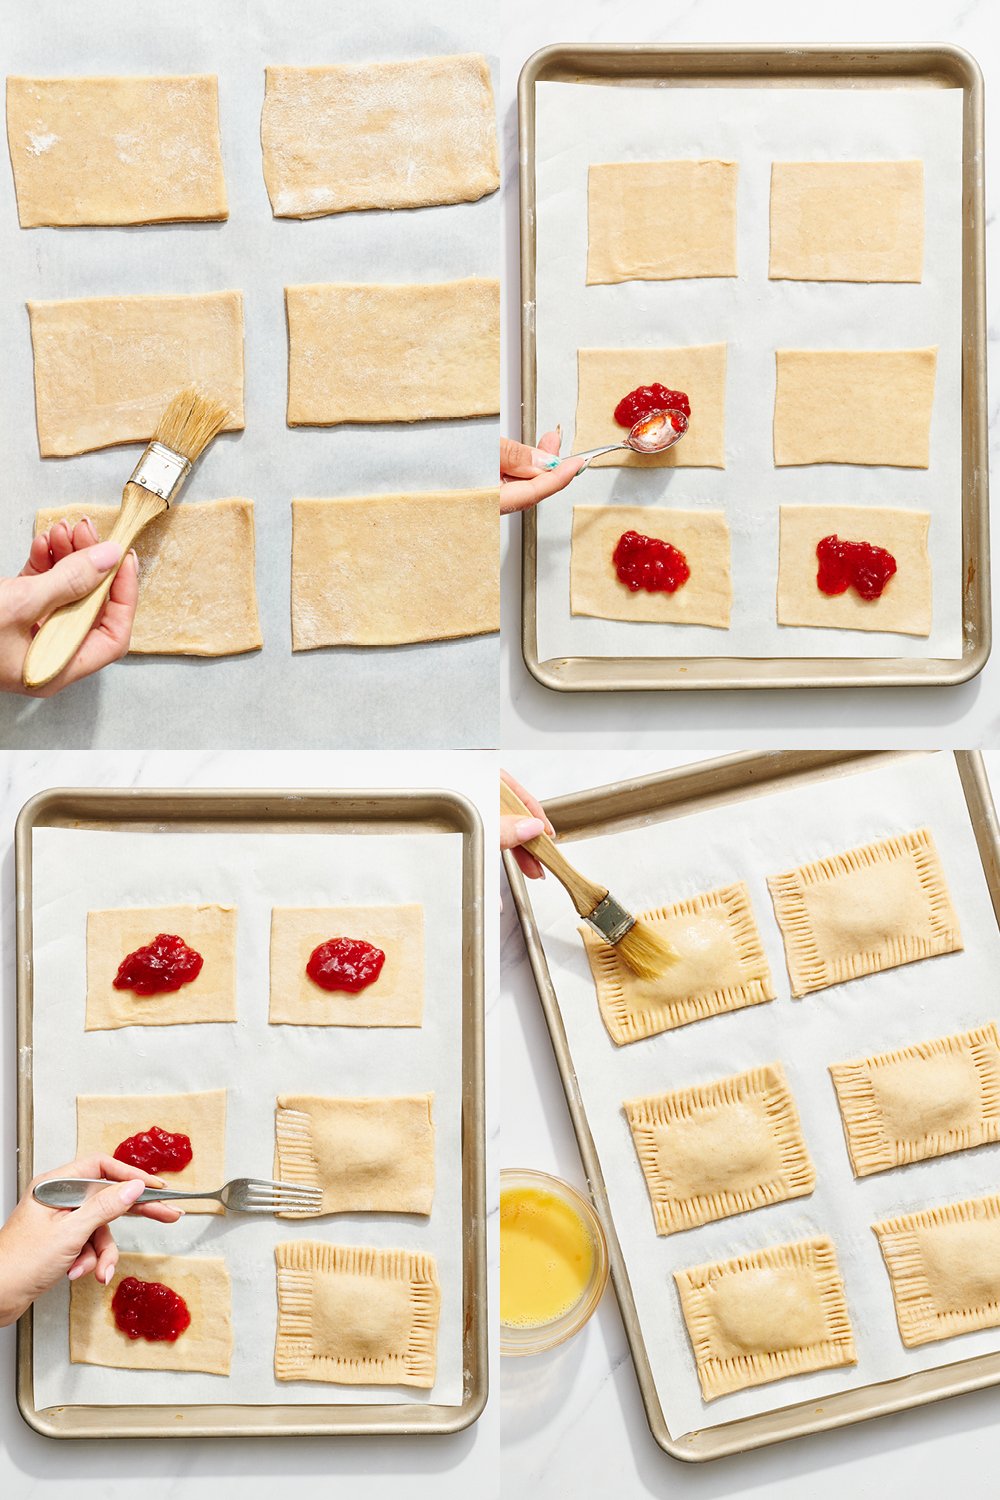 step-by-step photos showing how to fill and assemble the pastries.